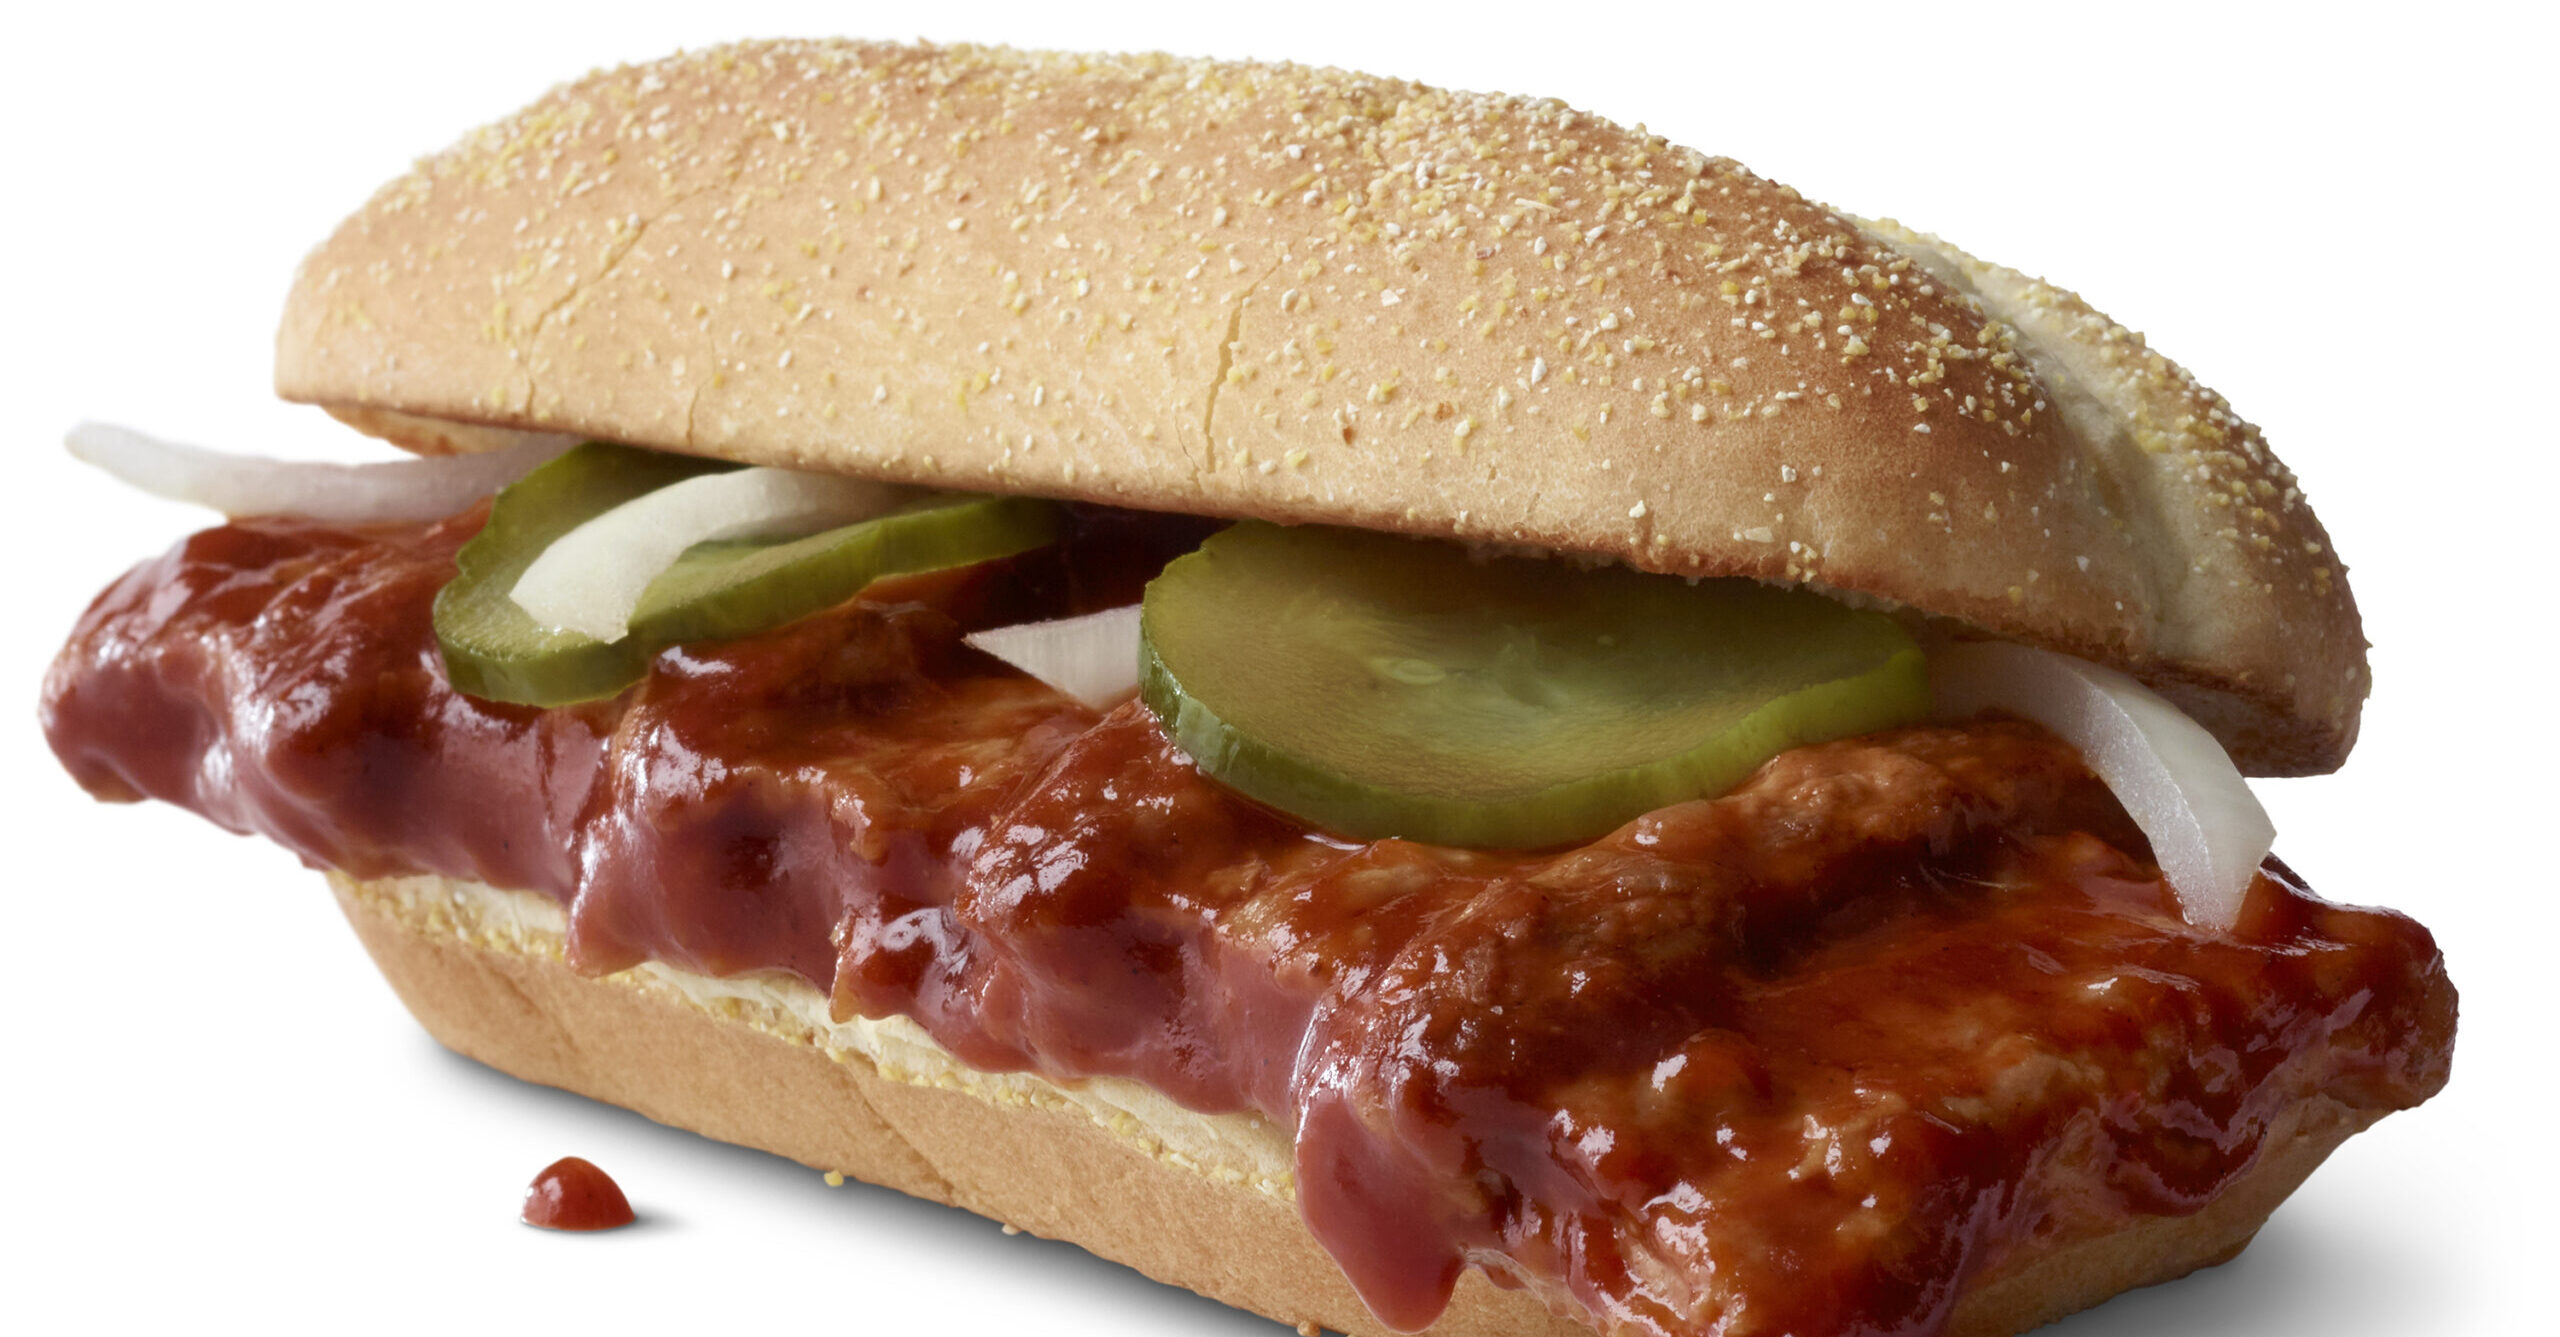 This photo provided by McDonald's shows the McRib sandwich. McDonald’s announced that it was bringing its barbeque slathered sandwich with the cult following back for yet another run on Dec. 2. The fast-food giant said the sandwich would be available nationally for the first time since 2012, but only at participating restaurants for a limited time. (McDonald's via AP)